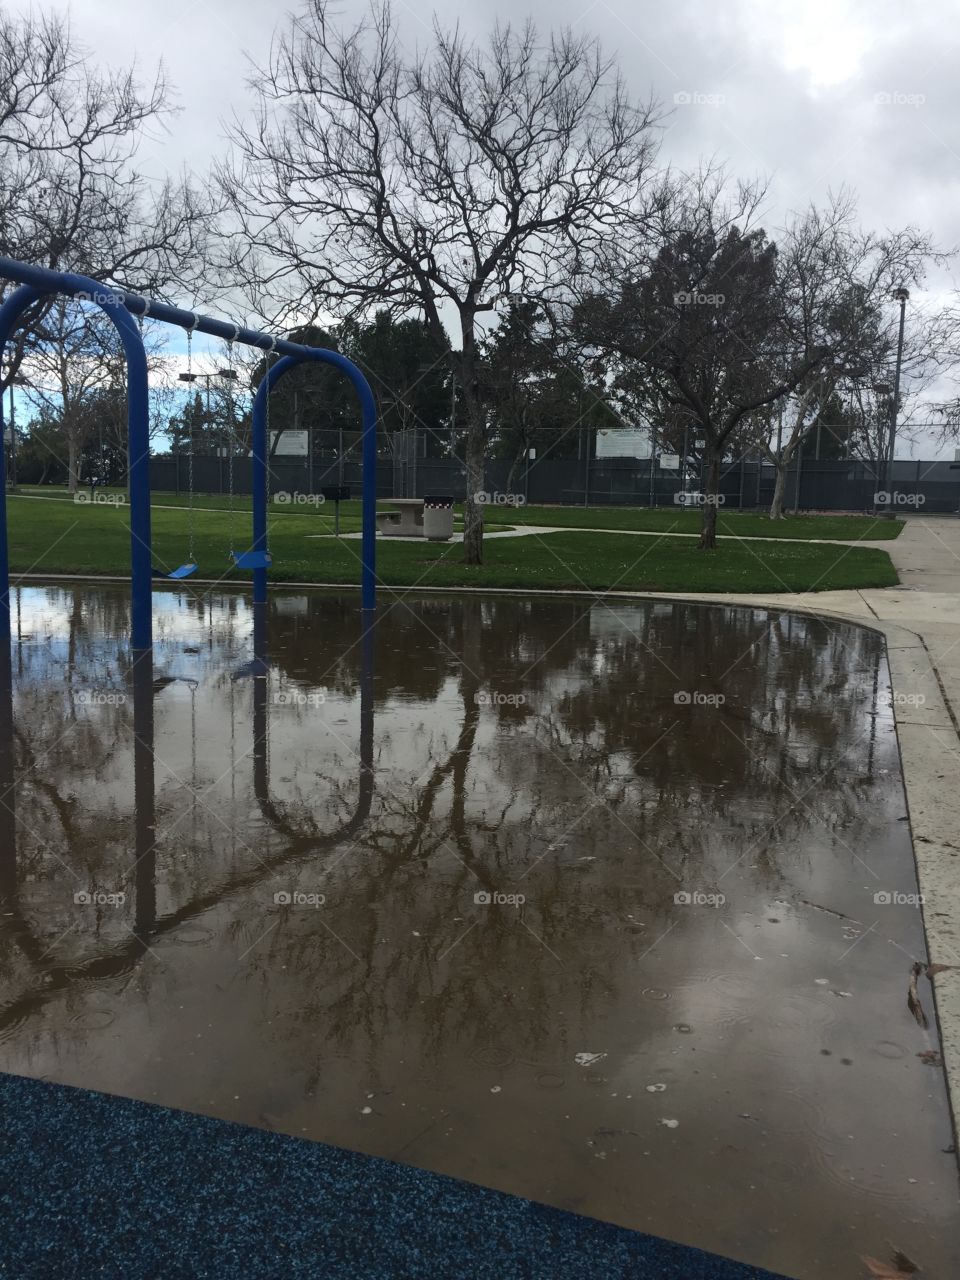 Rainy day and flooded playground. Swings, green grass, and trees shown. Reflection of park shown through large puddle. 